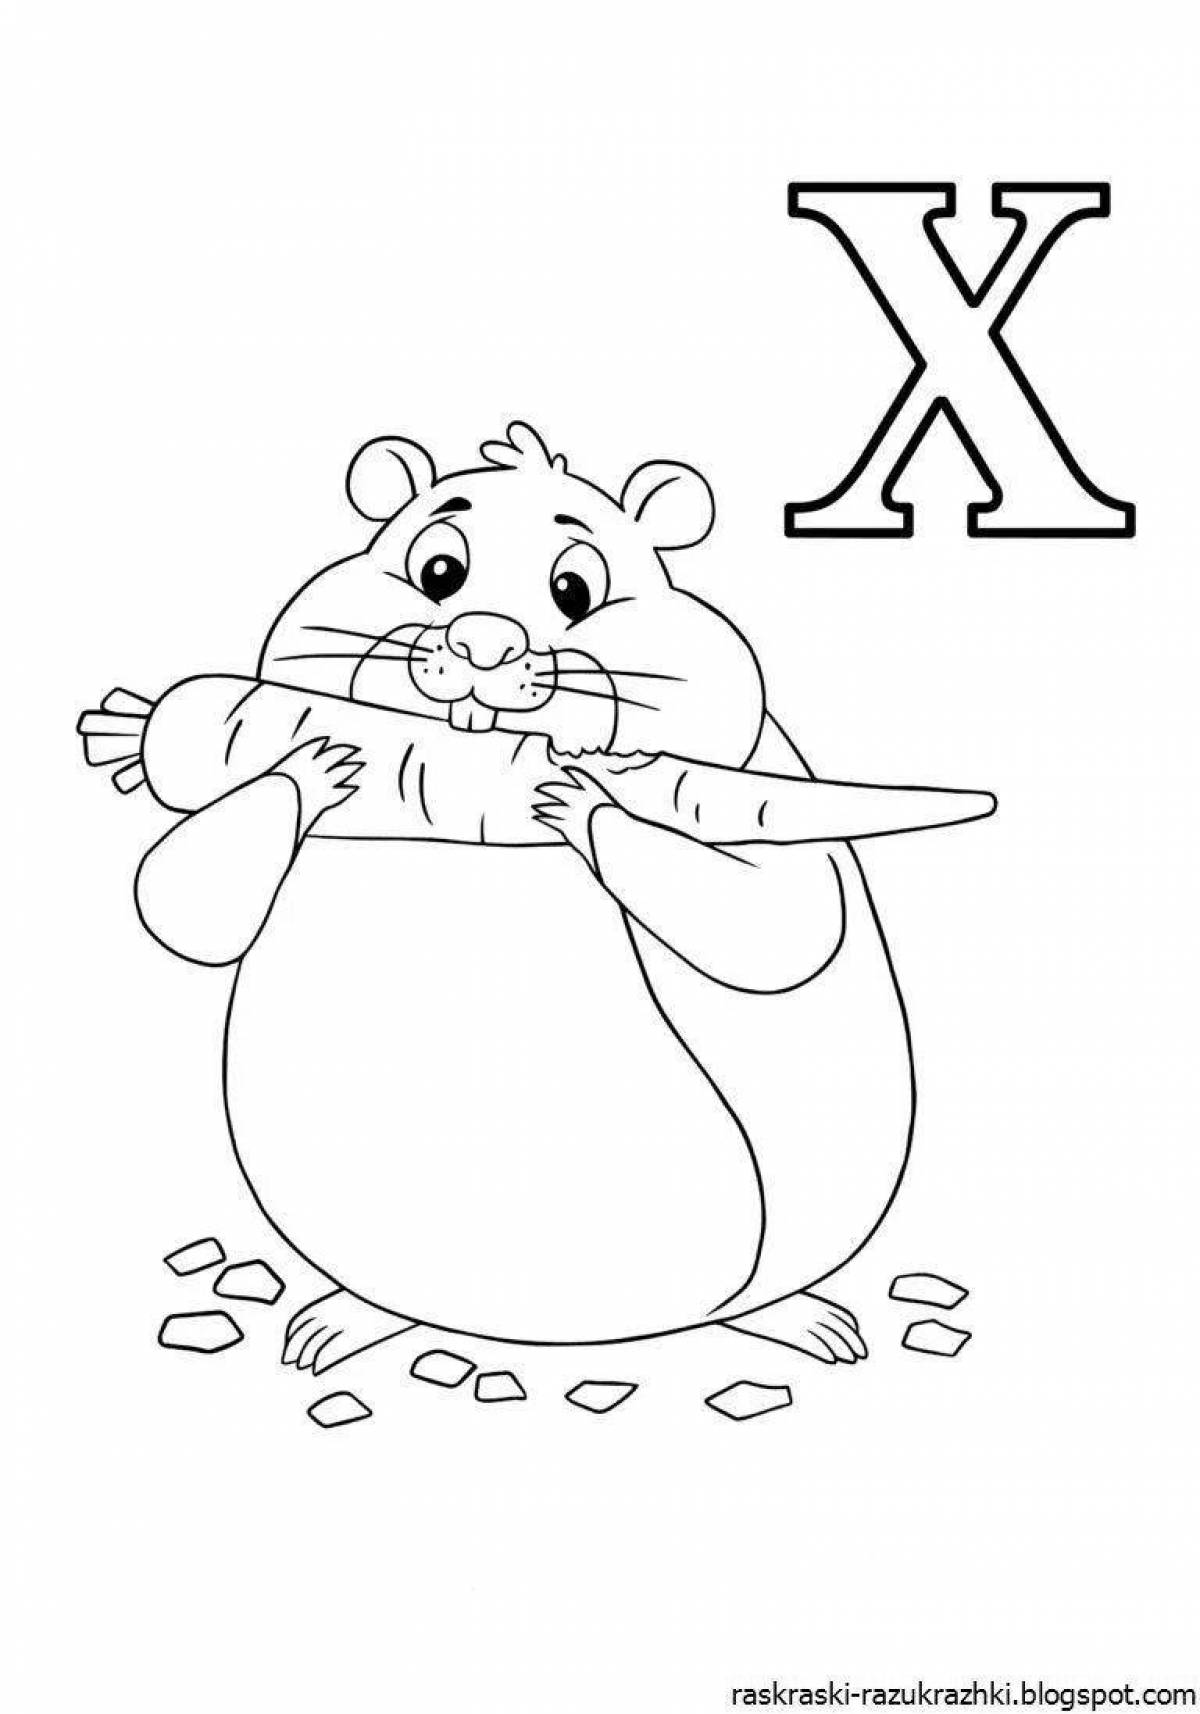 Fantastic xylophone coloring page